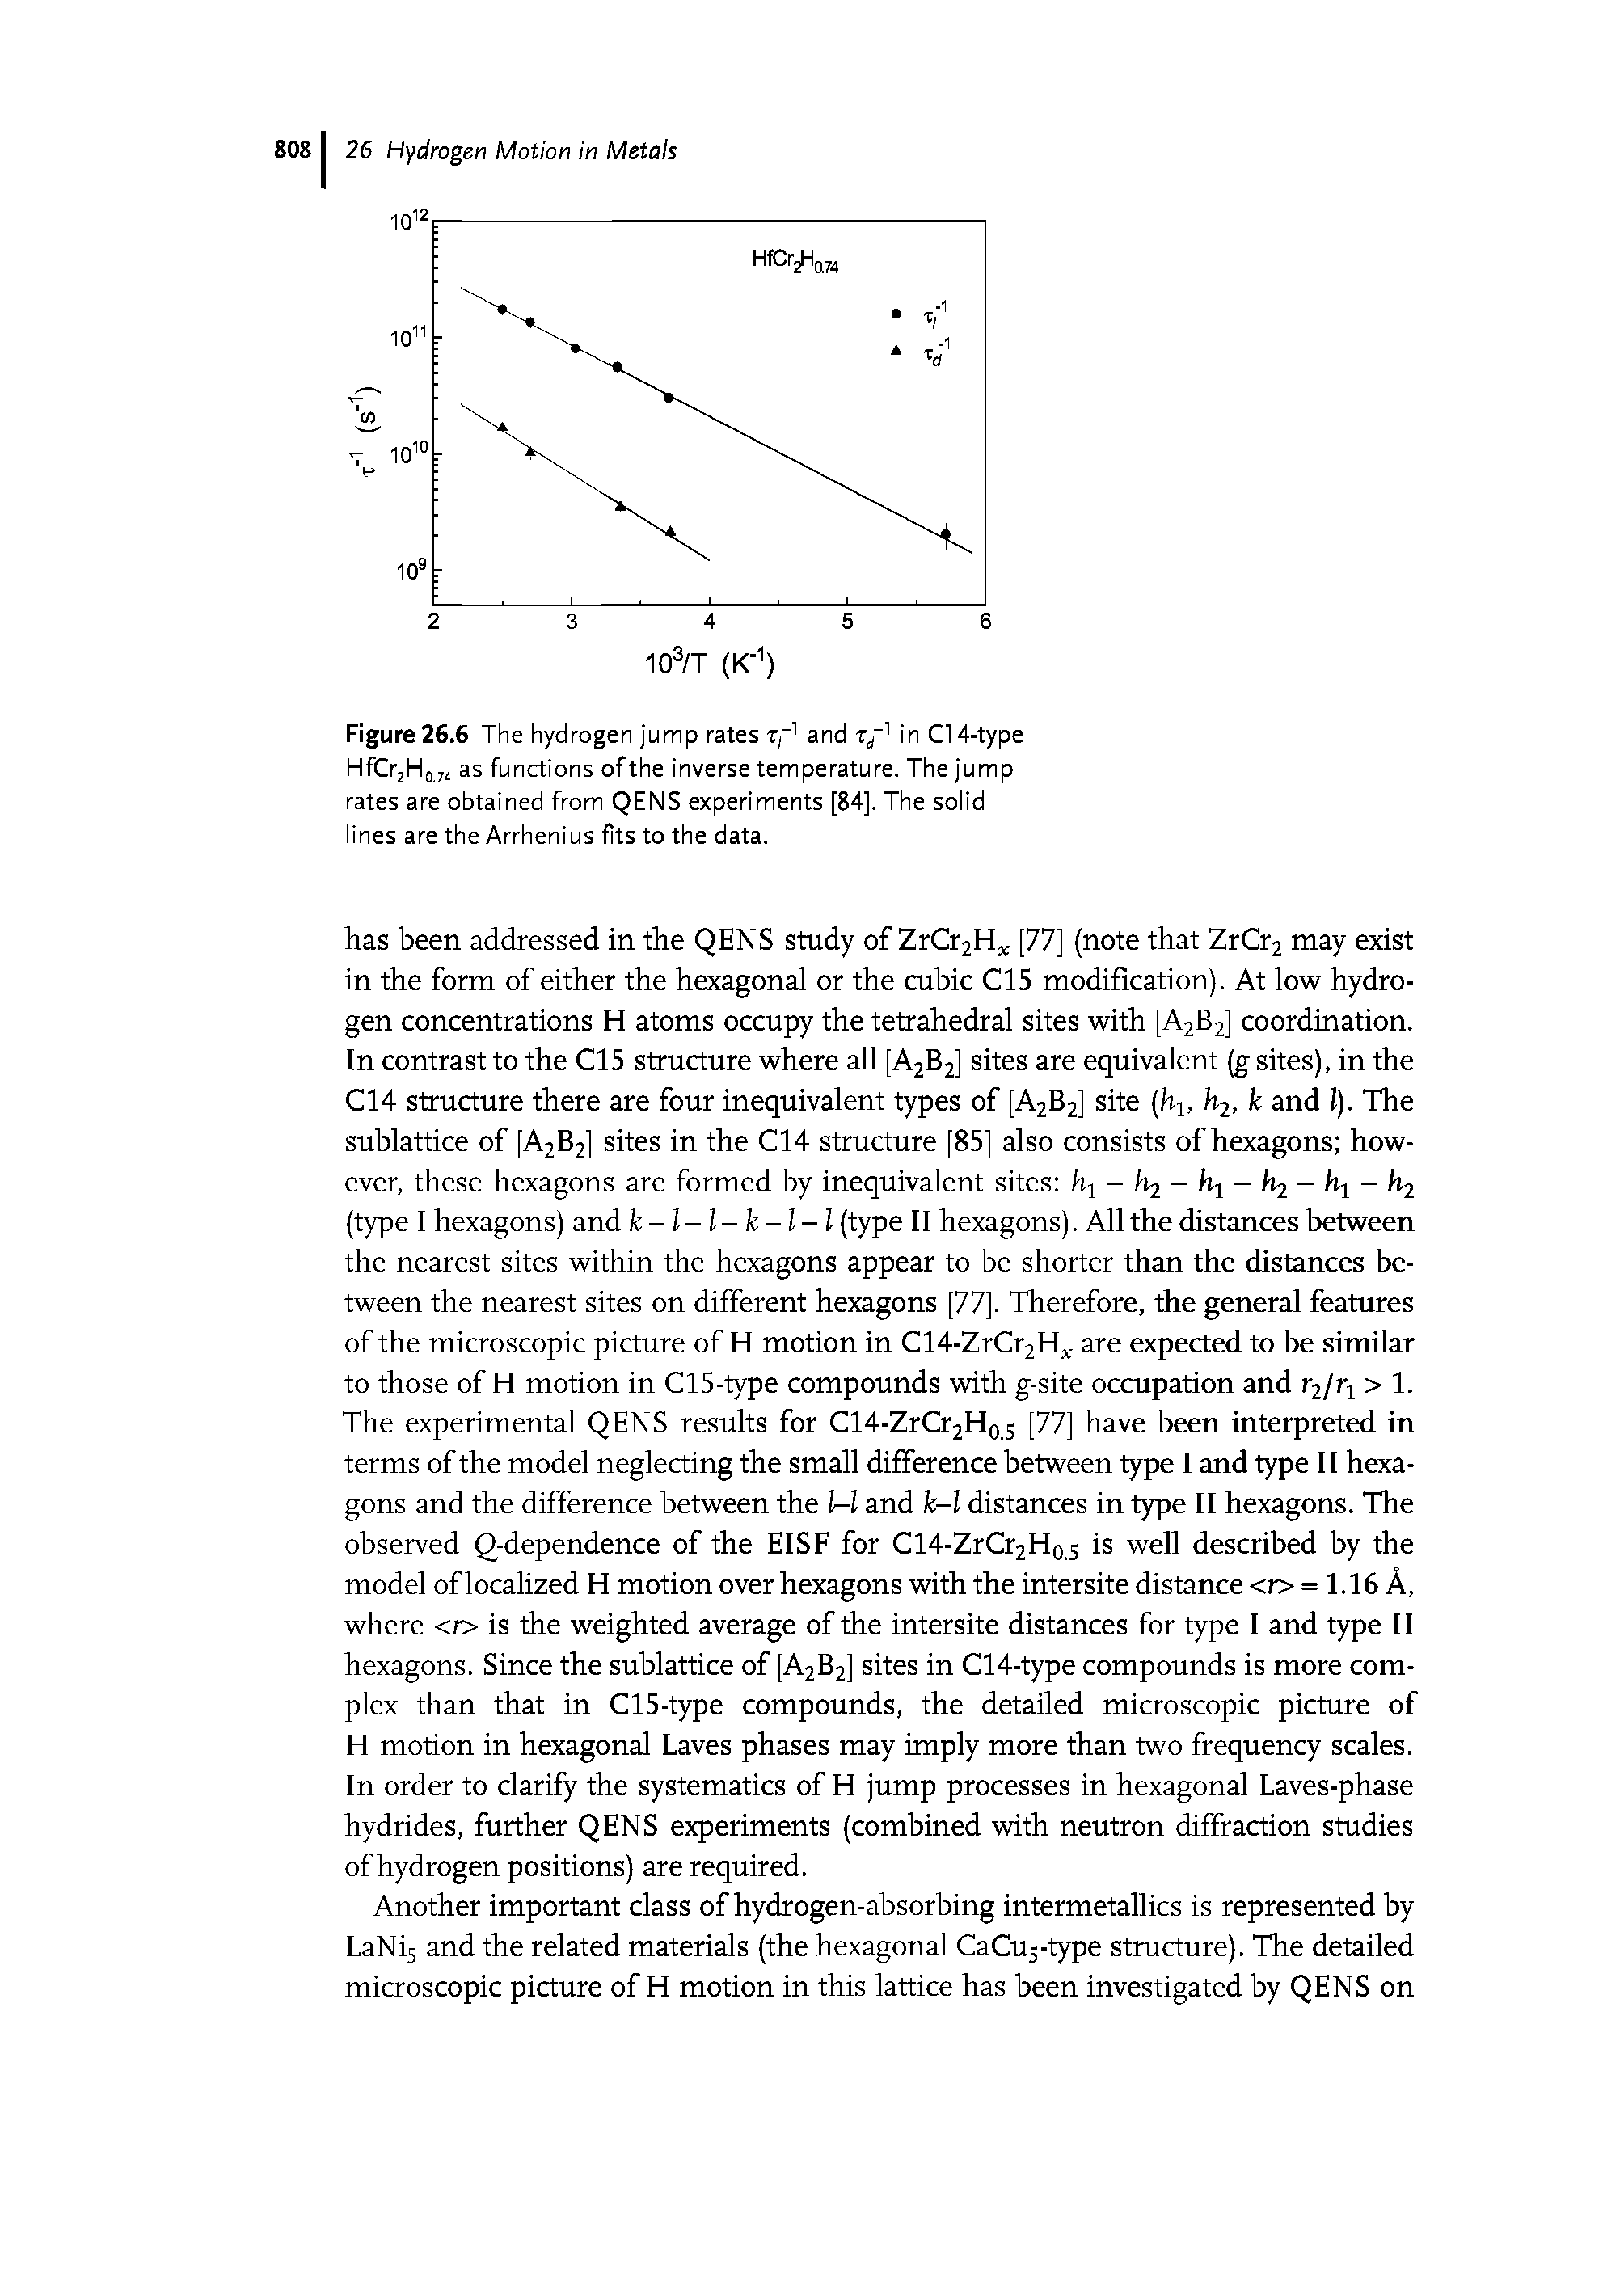 Figure 26.6 The hydrogen jump rates t," and Tj" in Cl 4-type HfCrjHj, as functions ofthe inverse temperature. The jump rates are obtained from QENS experiments [84]. The solid lines are the Arrhenius fits to the data.